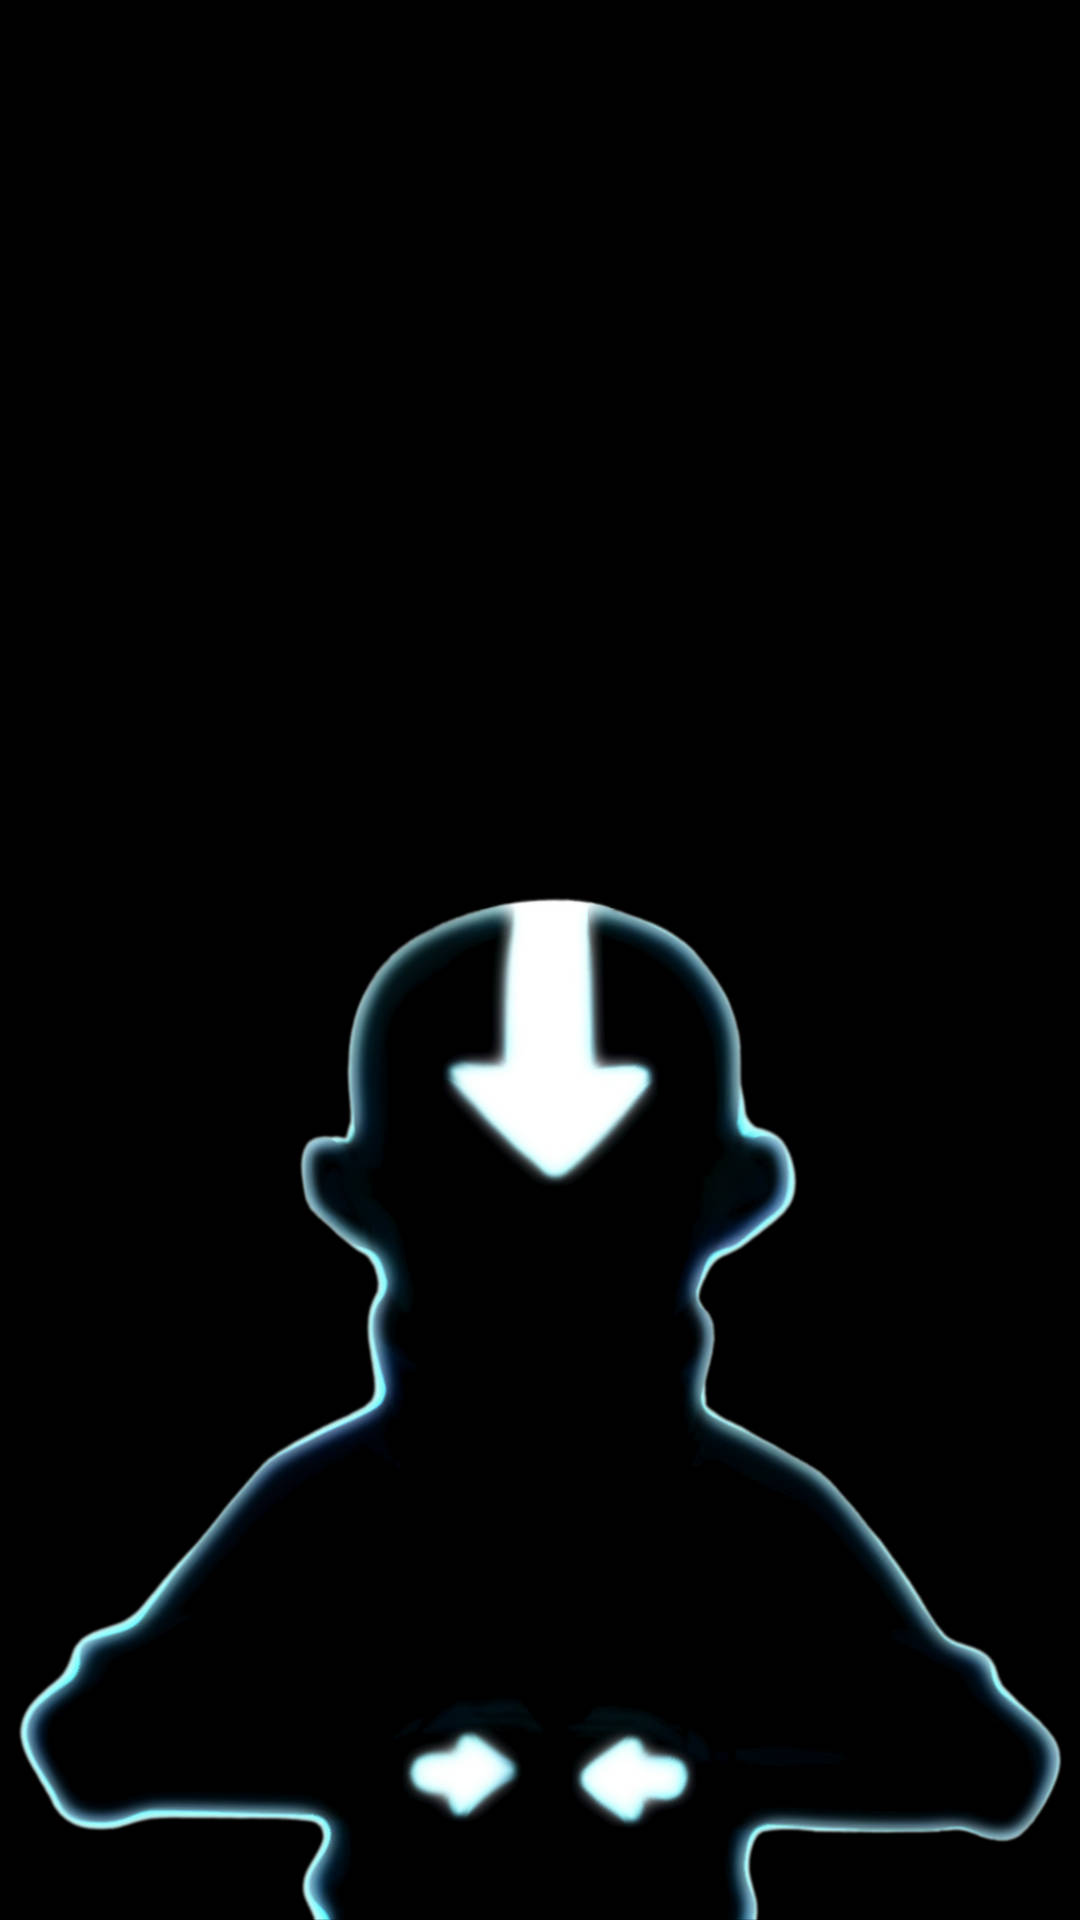 Avatar The Last Airbender Aang Silhouette Background